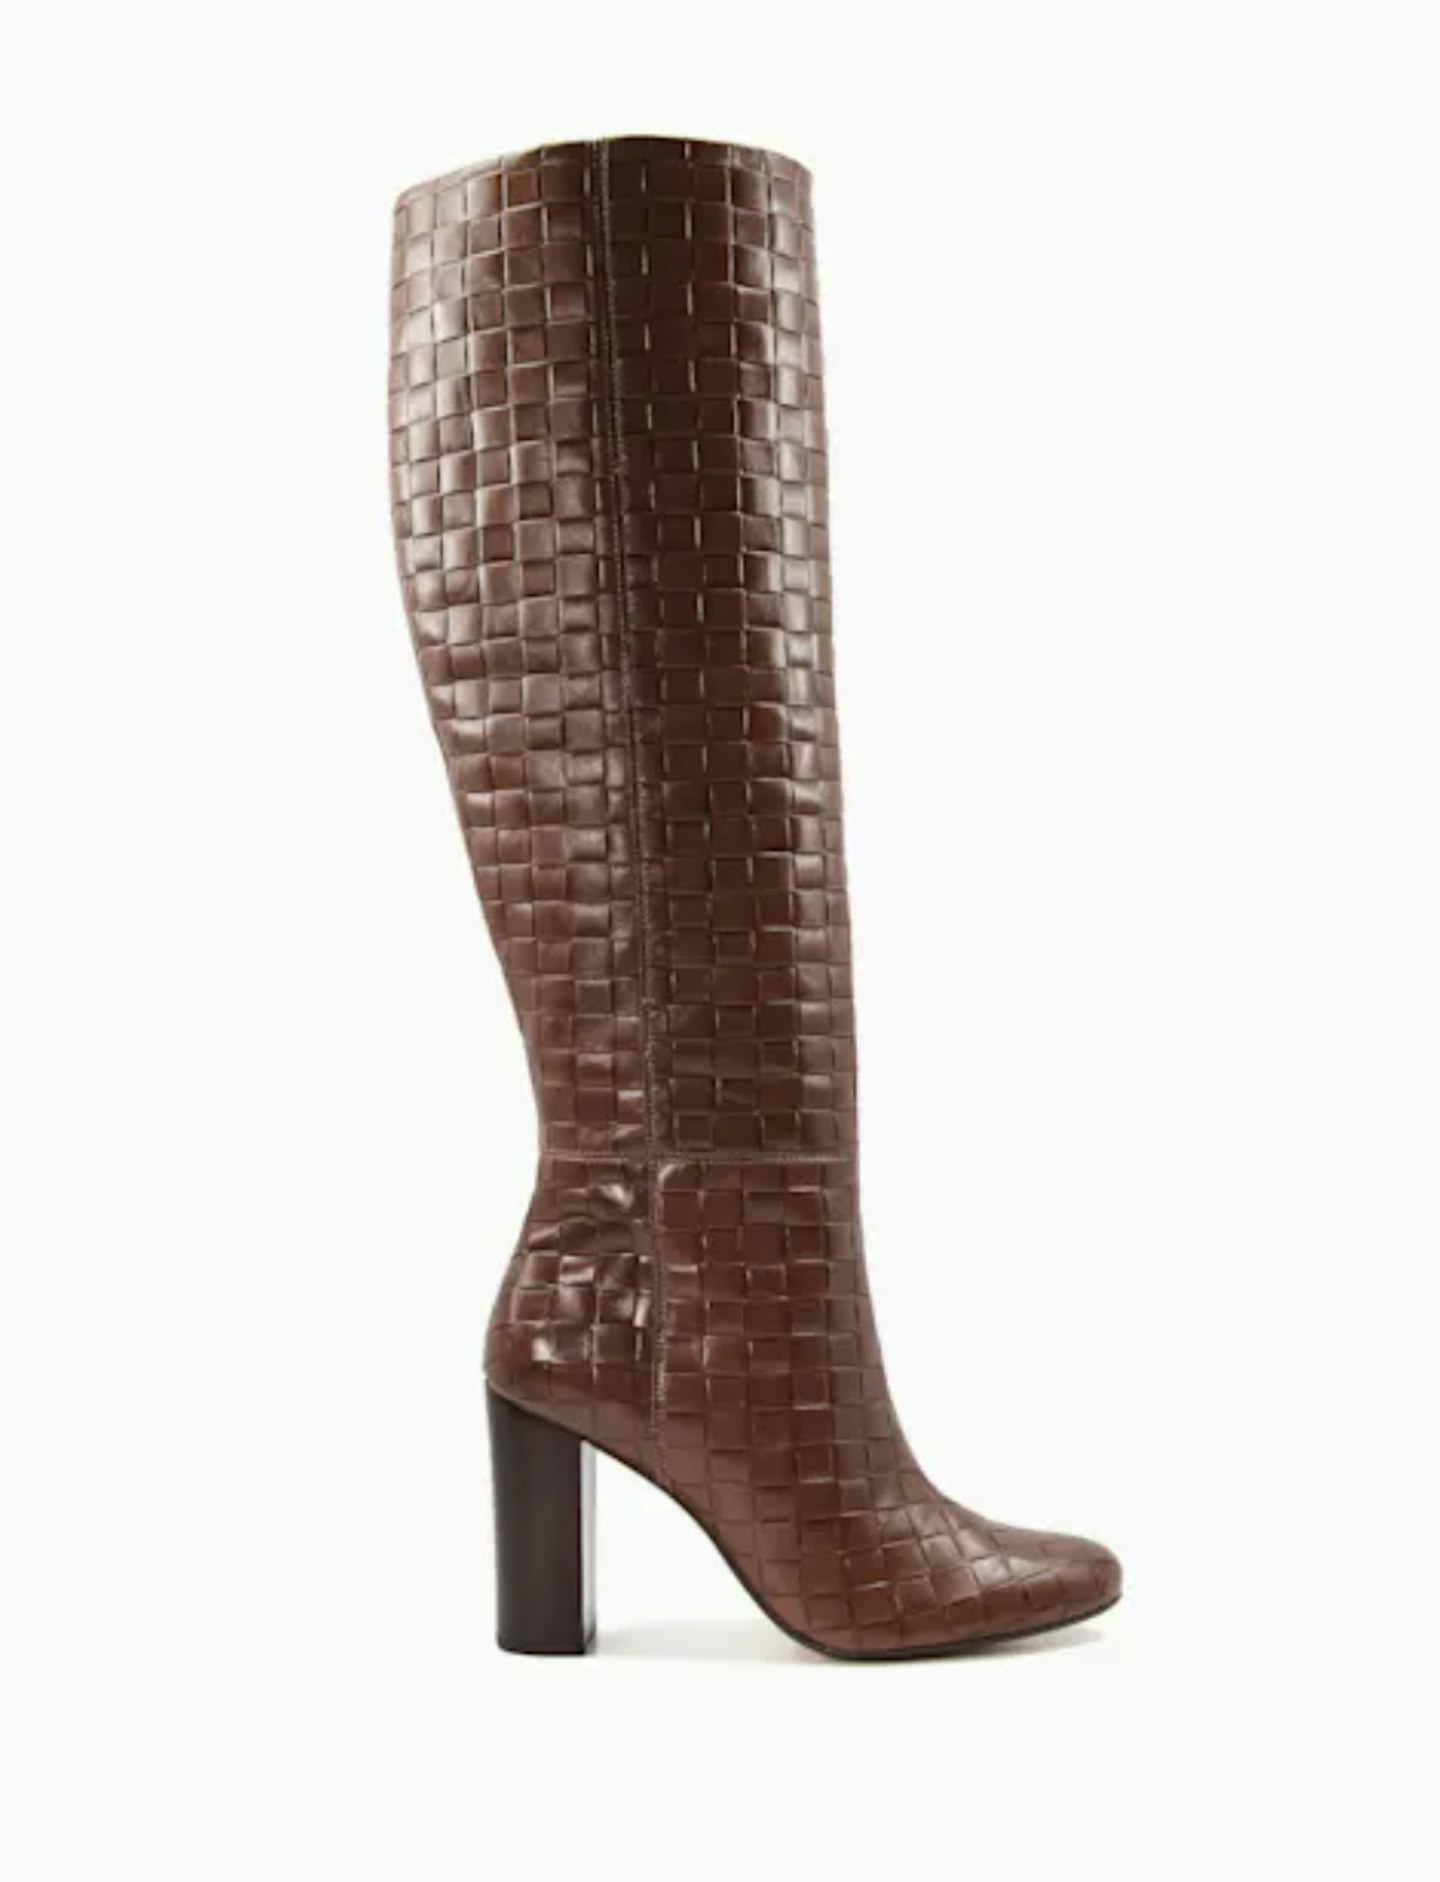 Dune, Woven-Leather Knee-High Boots